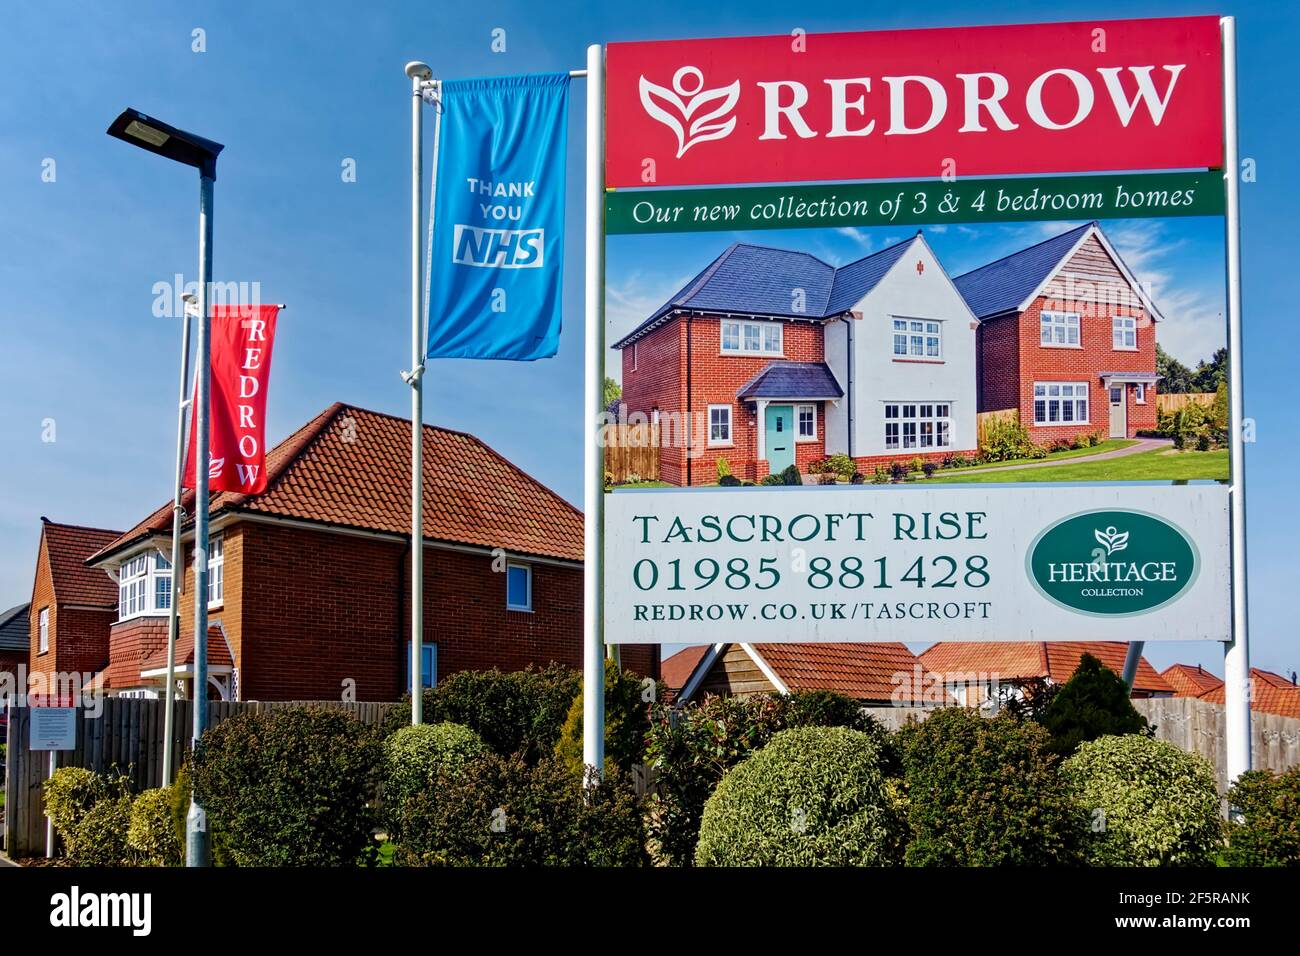 Warminster, Wiltshire, UK - 9 Marzo 2021: Redrow Homes Tascroft Rise Housing Development Sign in Warminster, Wiltshire, England, UK Foto Stock